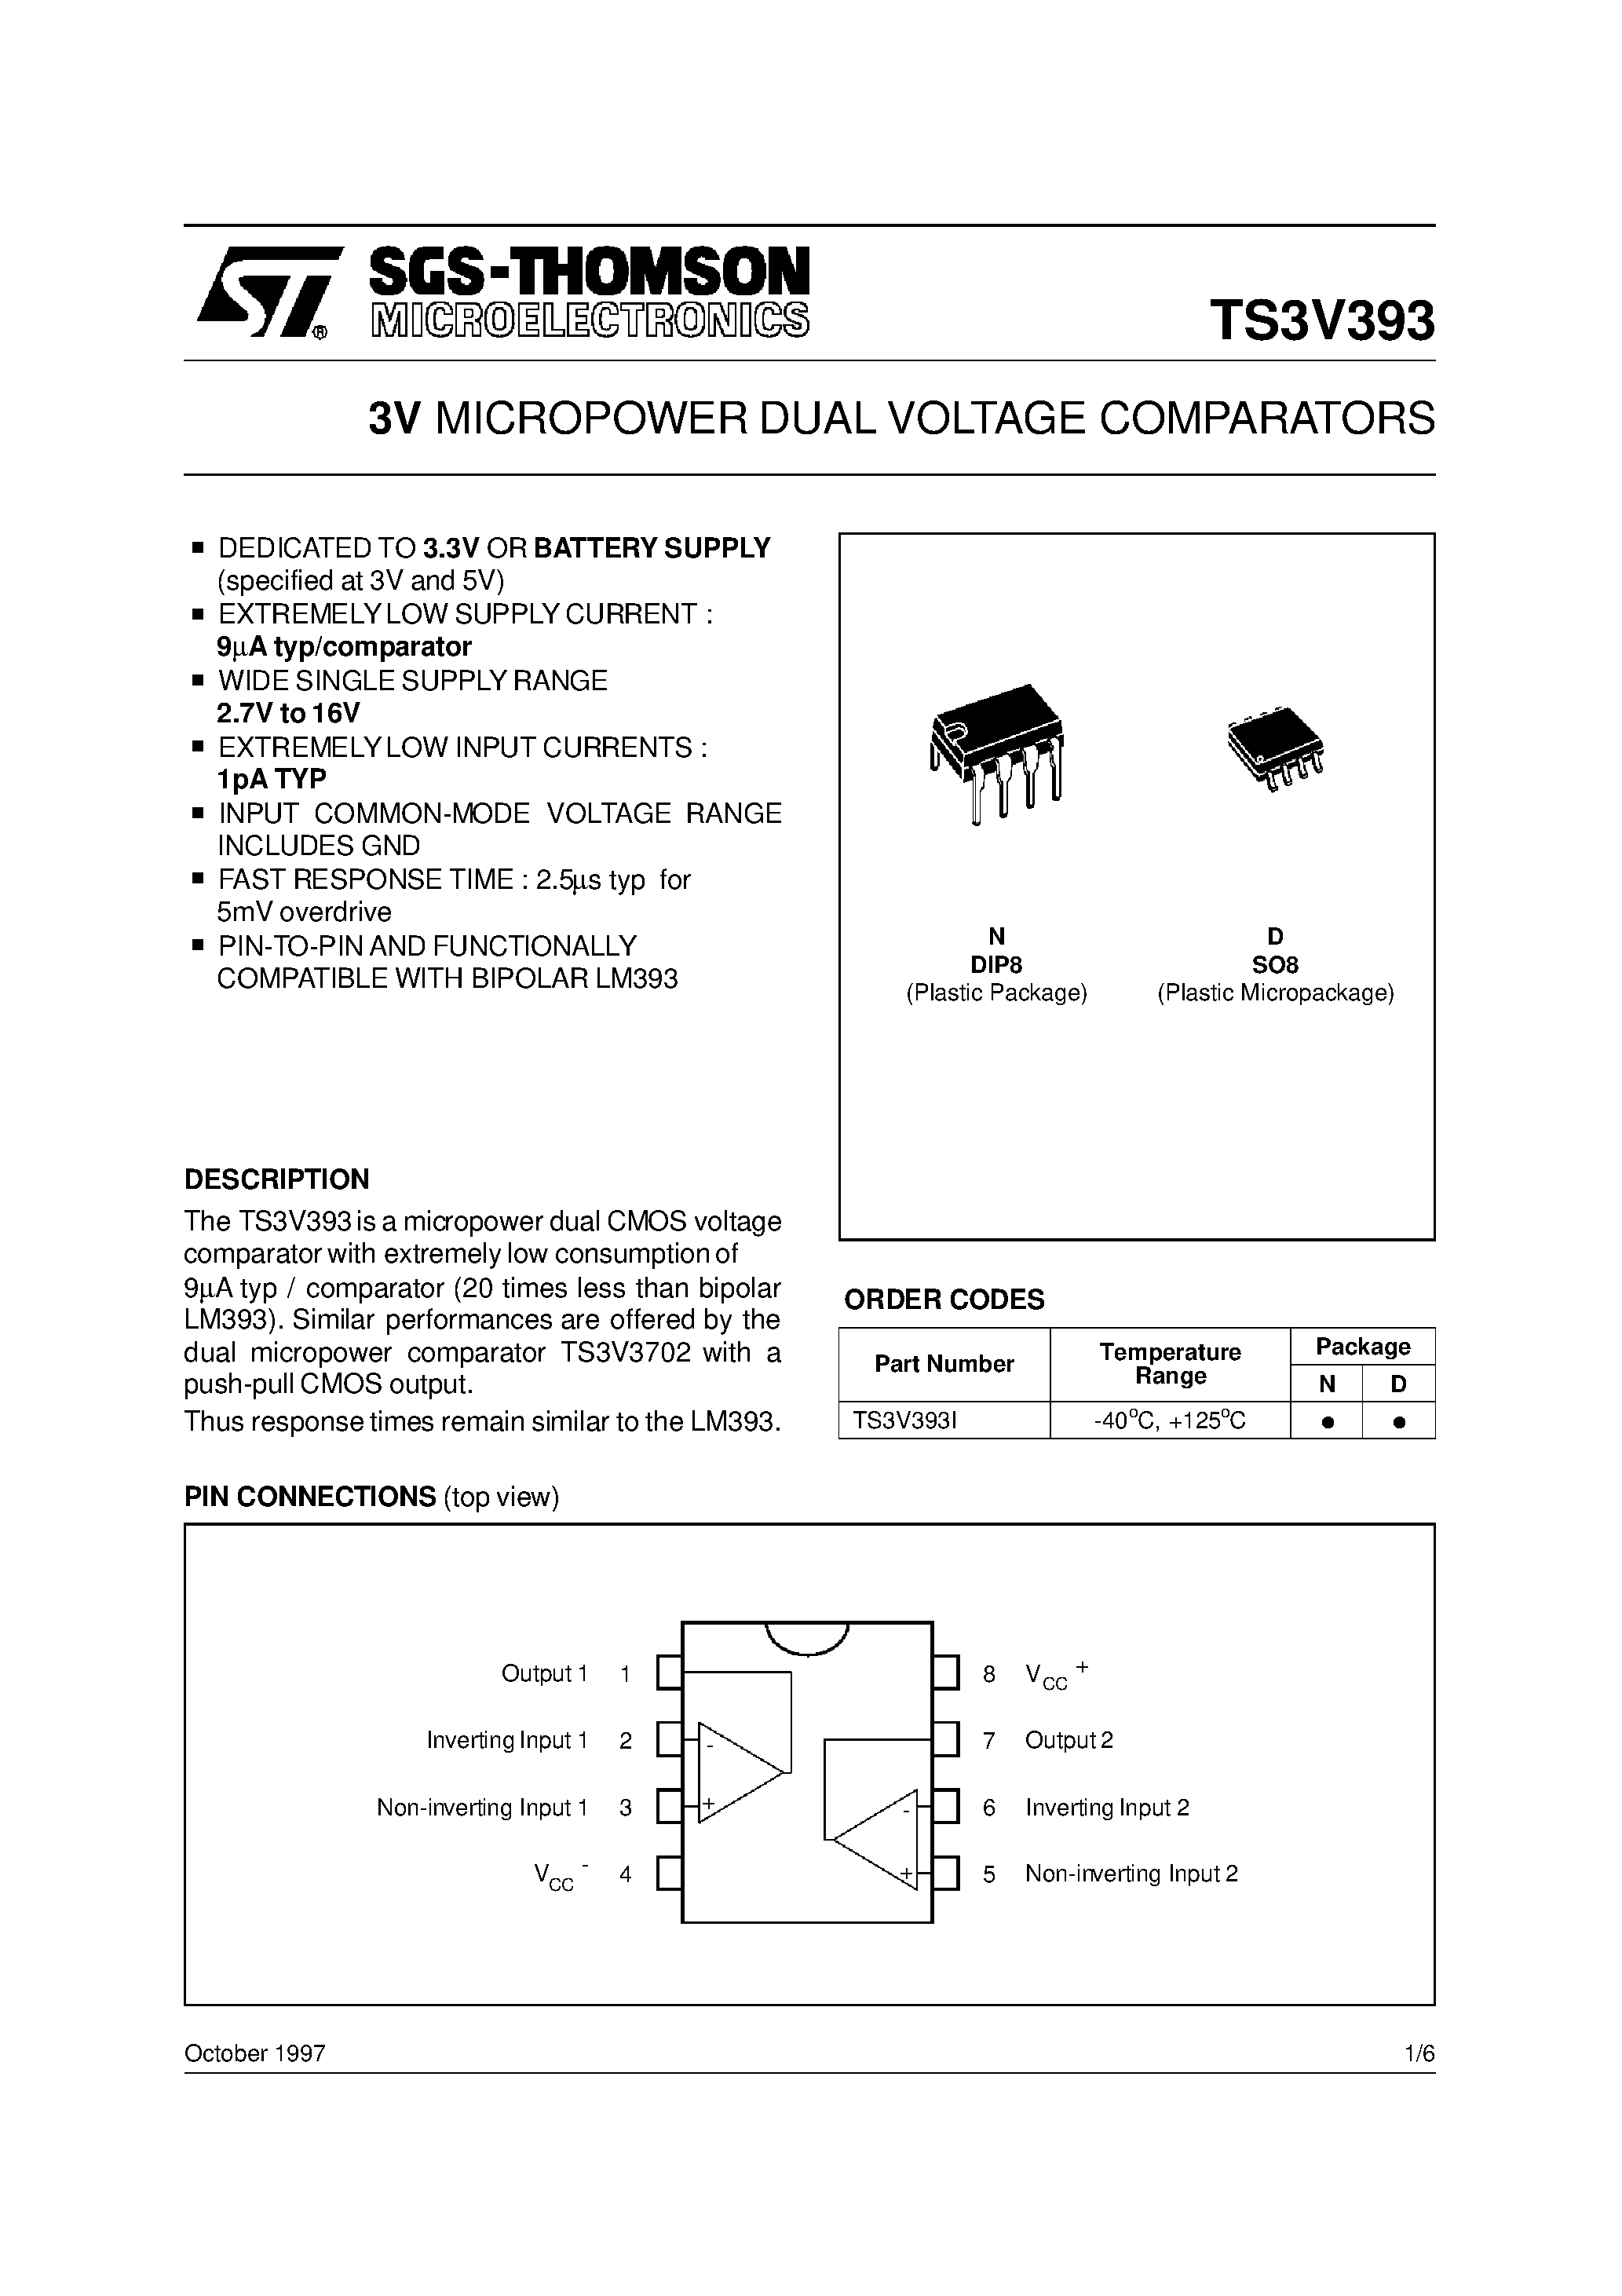 Datasheet TS3V393 - 3V MICROPOWER DUAL VOLTAGE COMPARATORS page 1